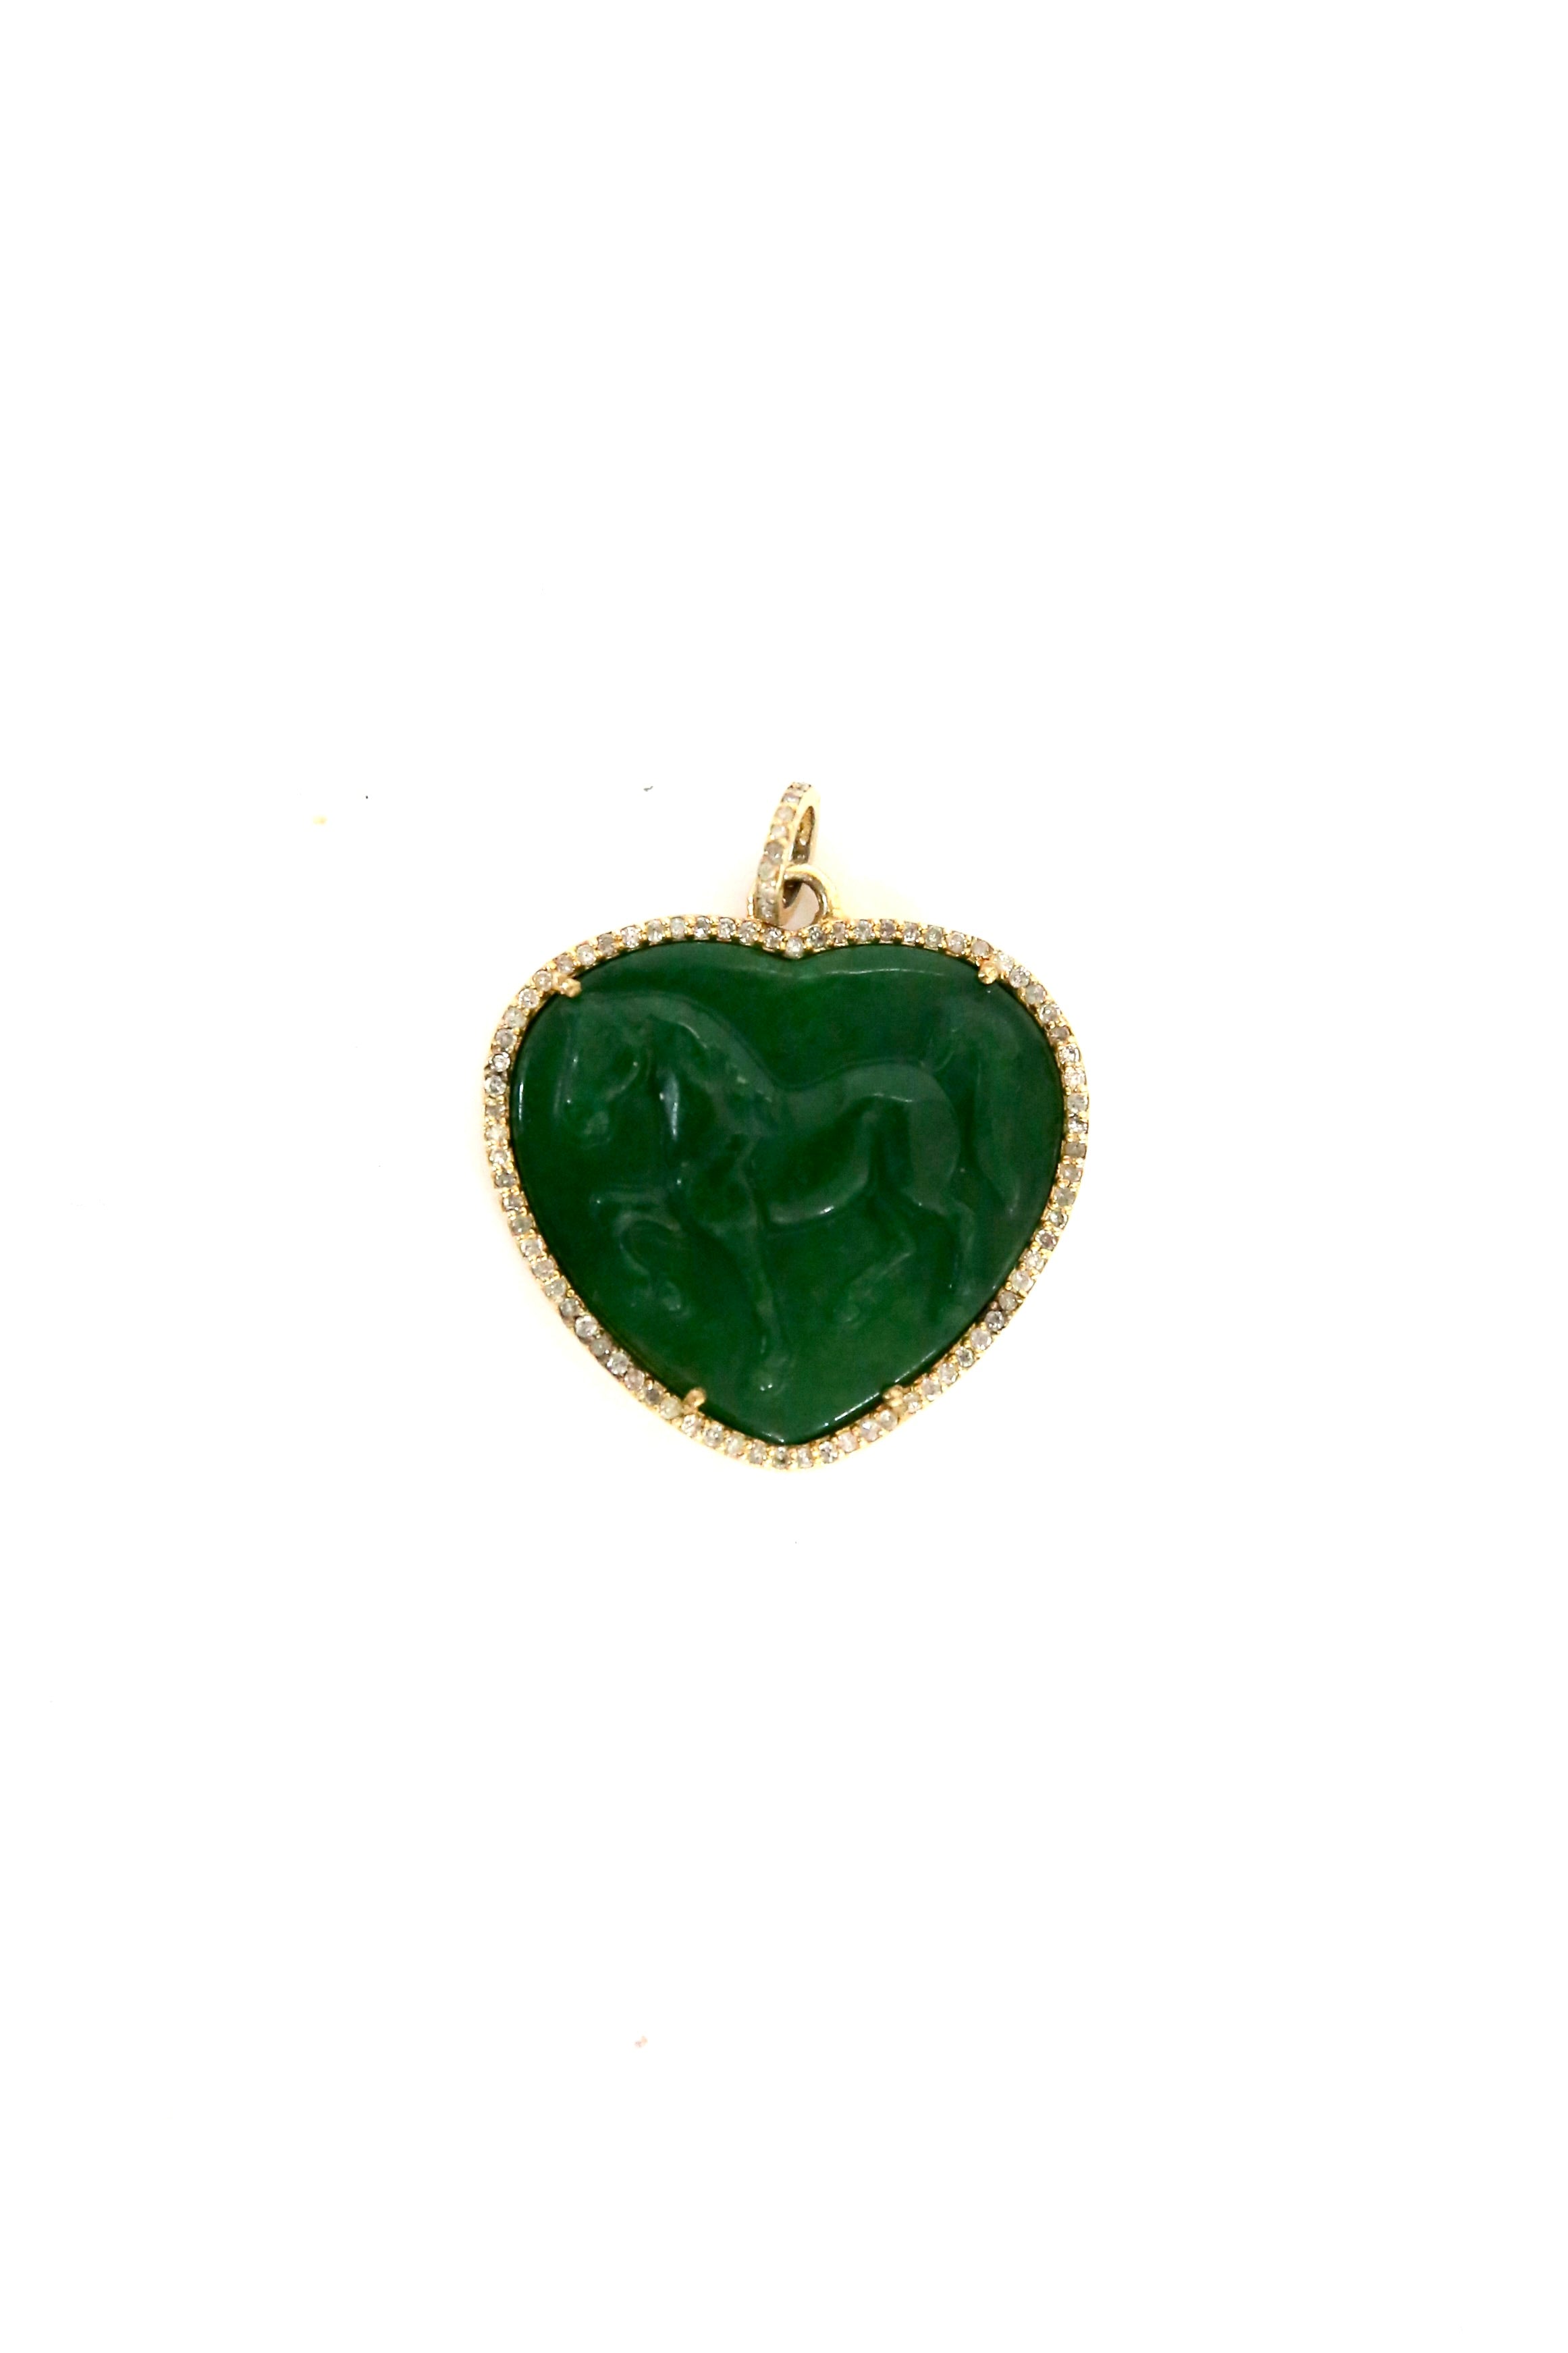 carved horse pendant - green onyx